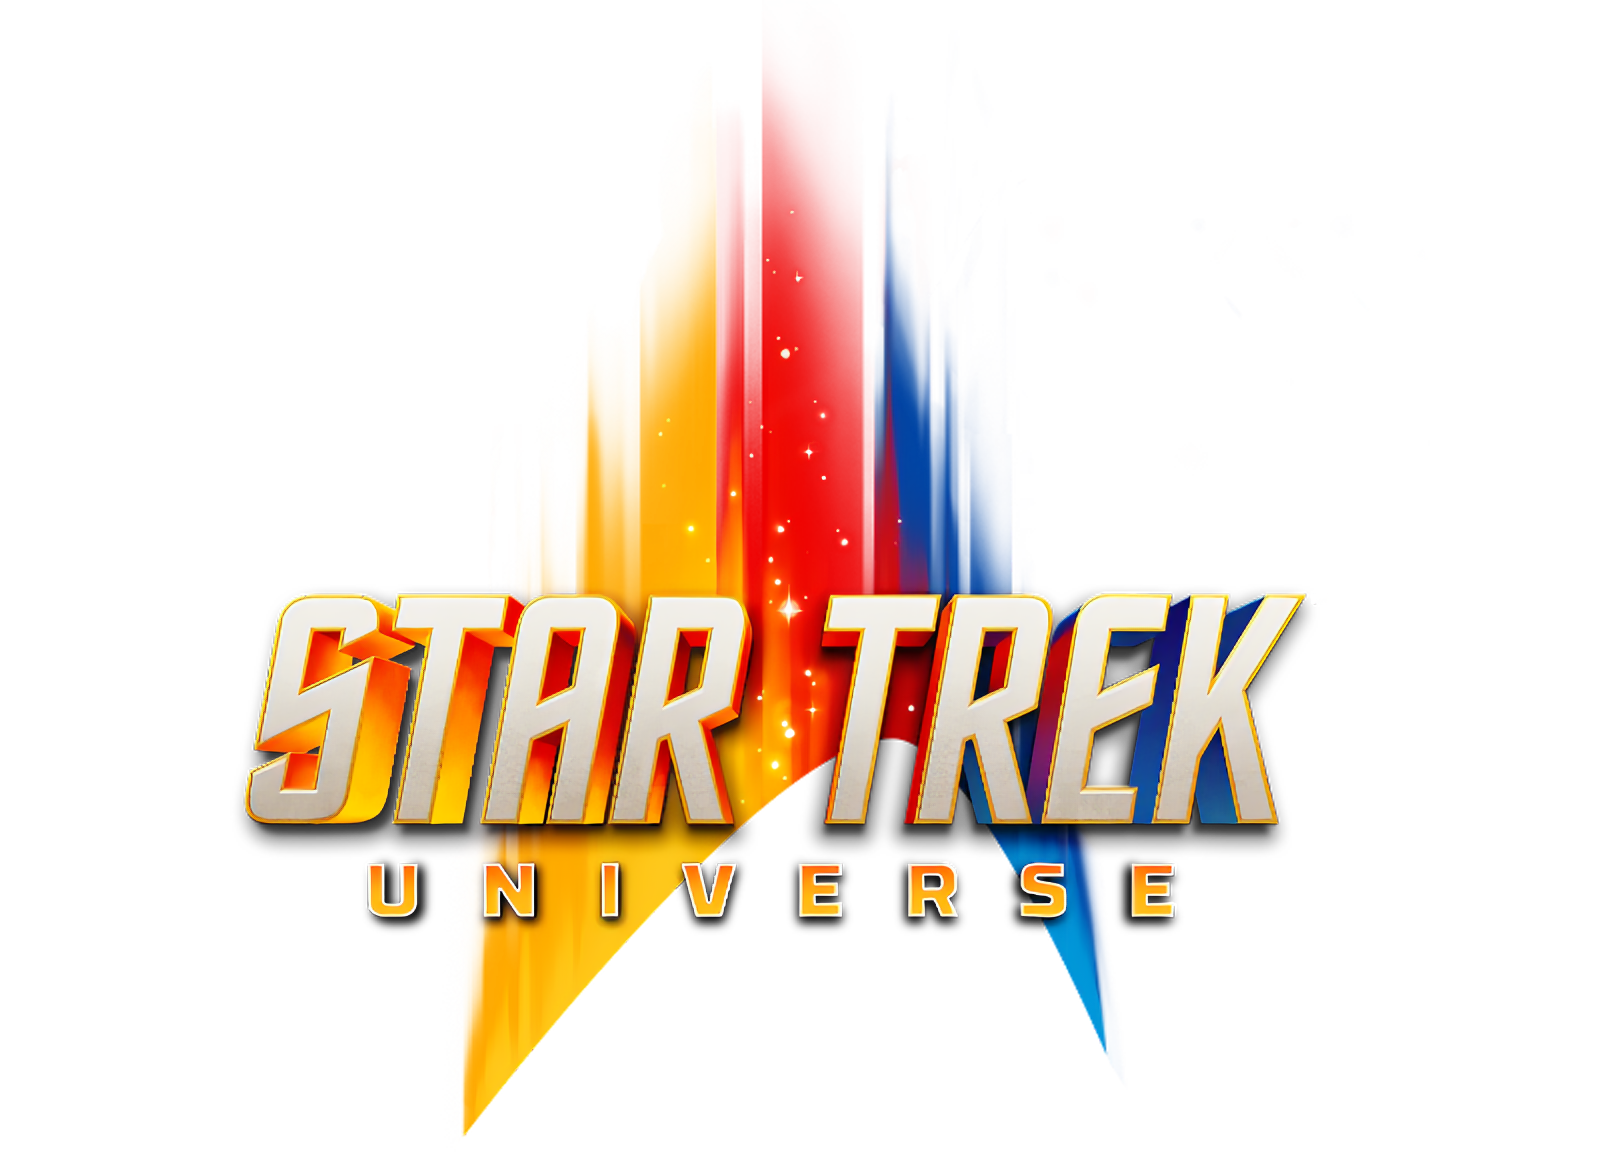 'Star Trek Universe' added to Comic-Con@Home panels list for July 23